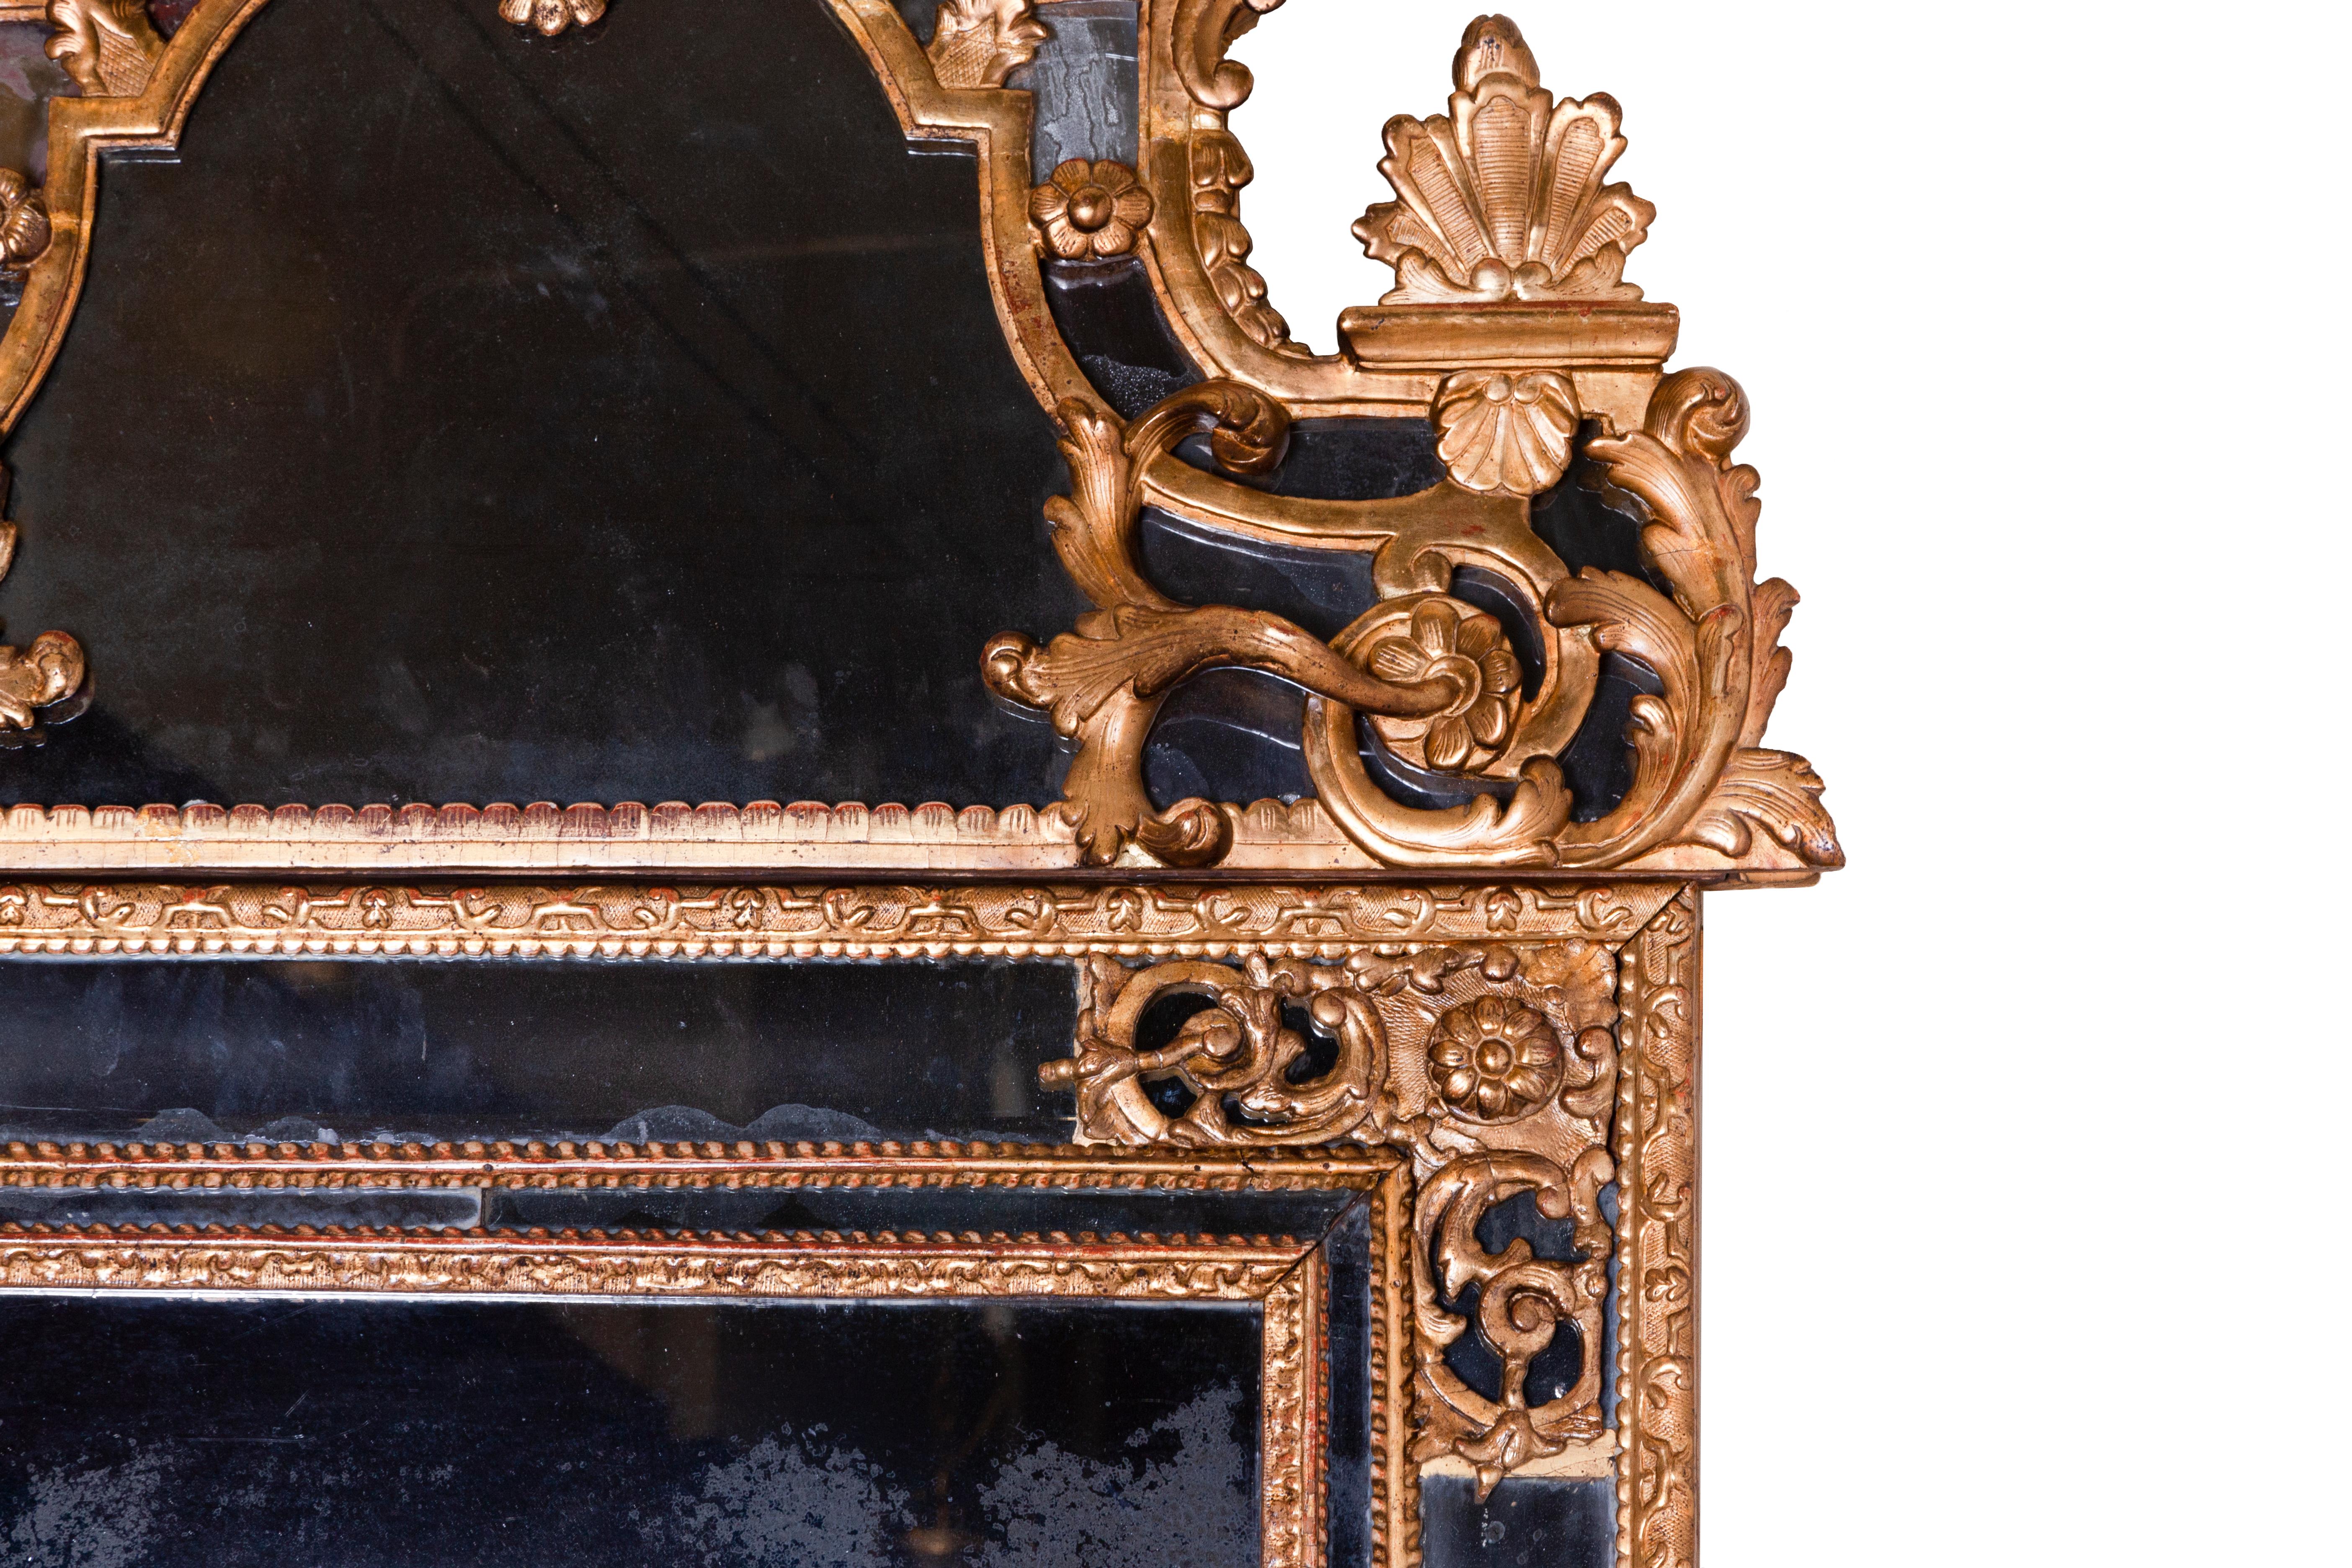 Regency giltwood mirror from the early 18th century.
It has a central rectangular mirror plate surrounded by four marginal plates set between carved and gilded pinewood framing sections.